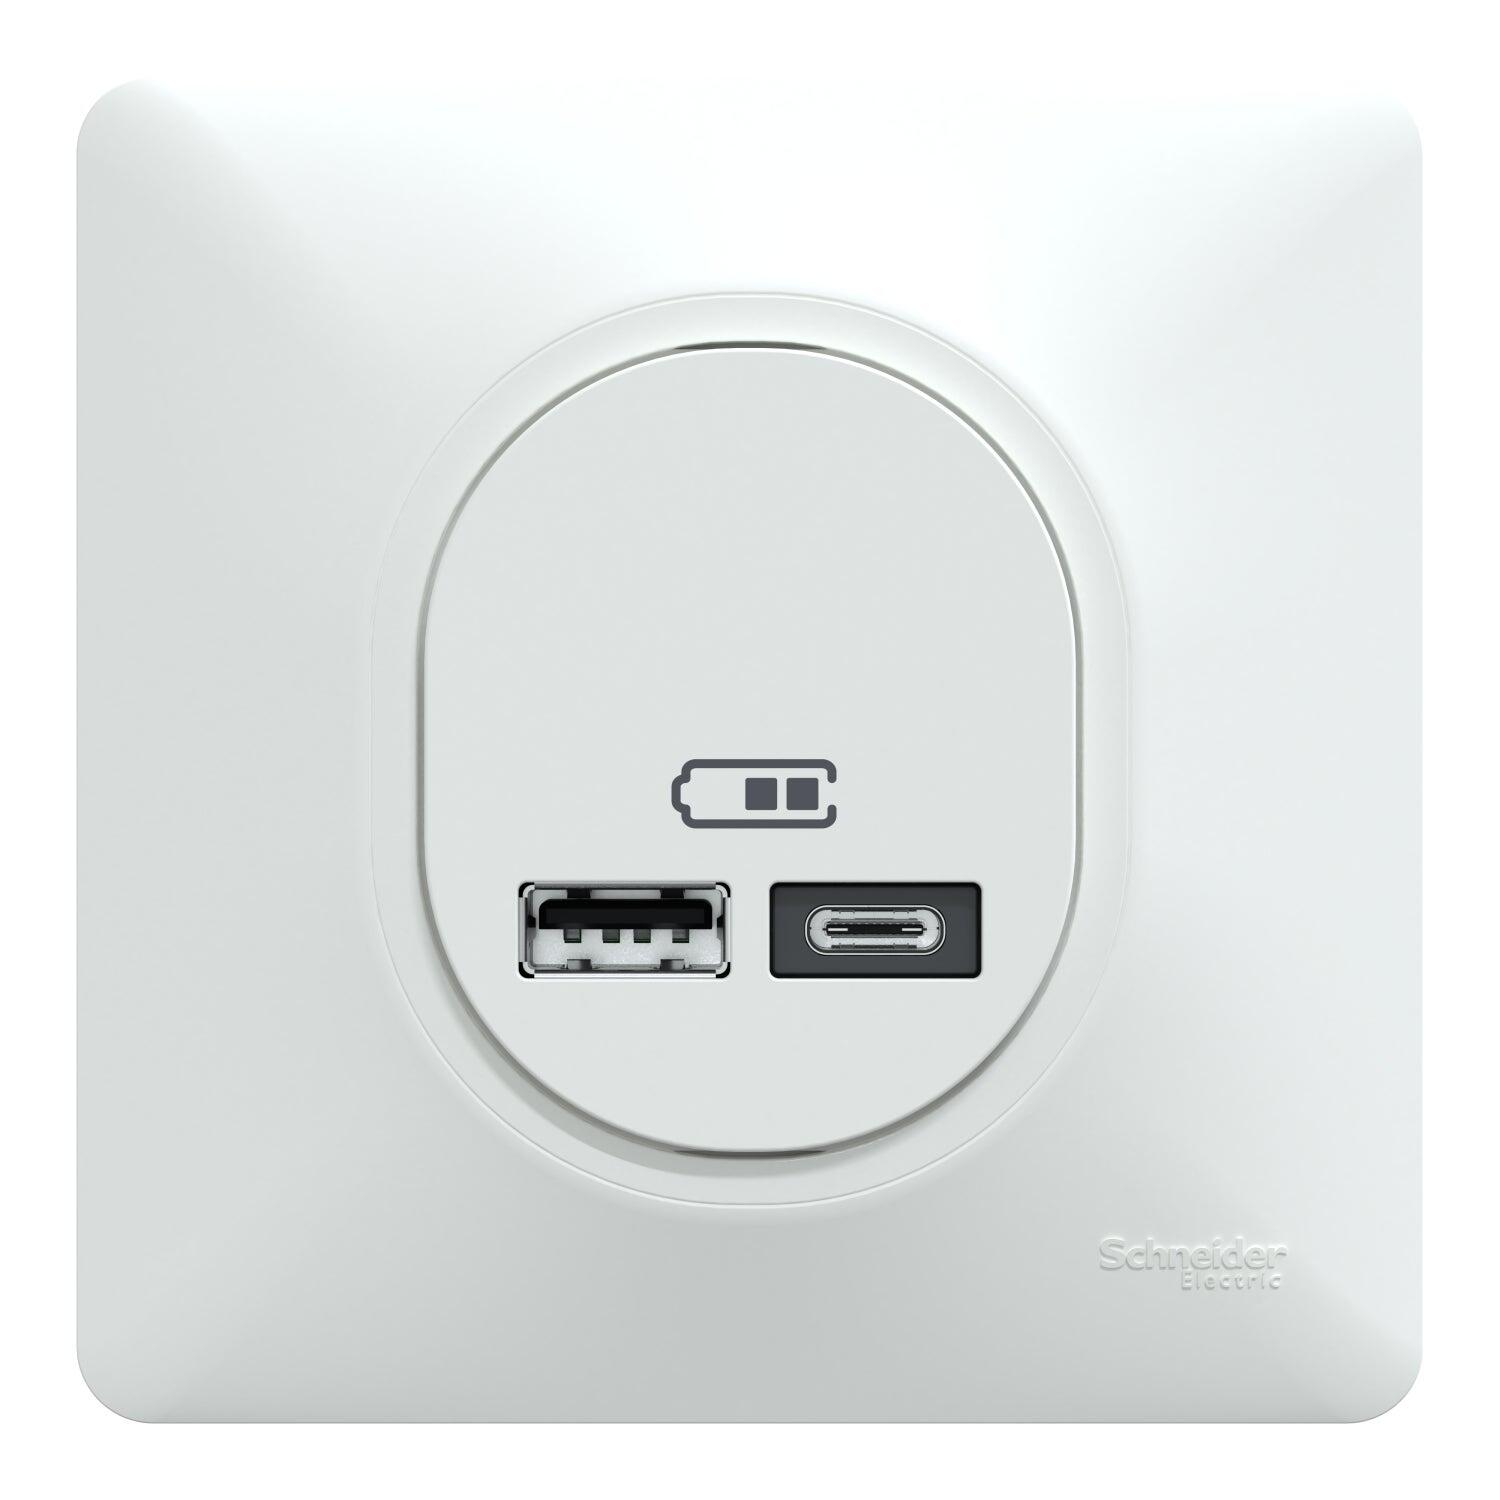 Prise chargeur double usb A+C complet Ovalis, SCHNEIDER ELECTRIC